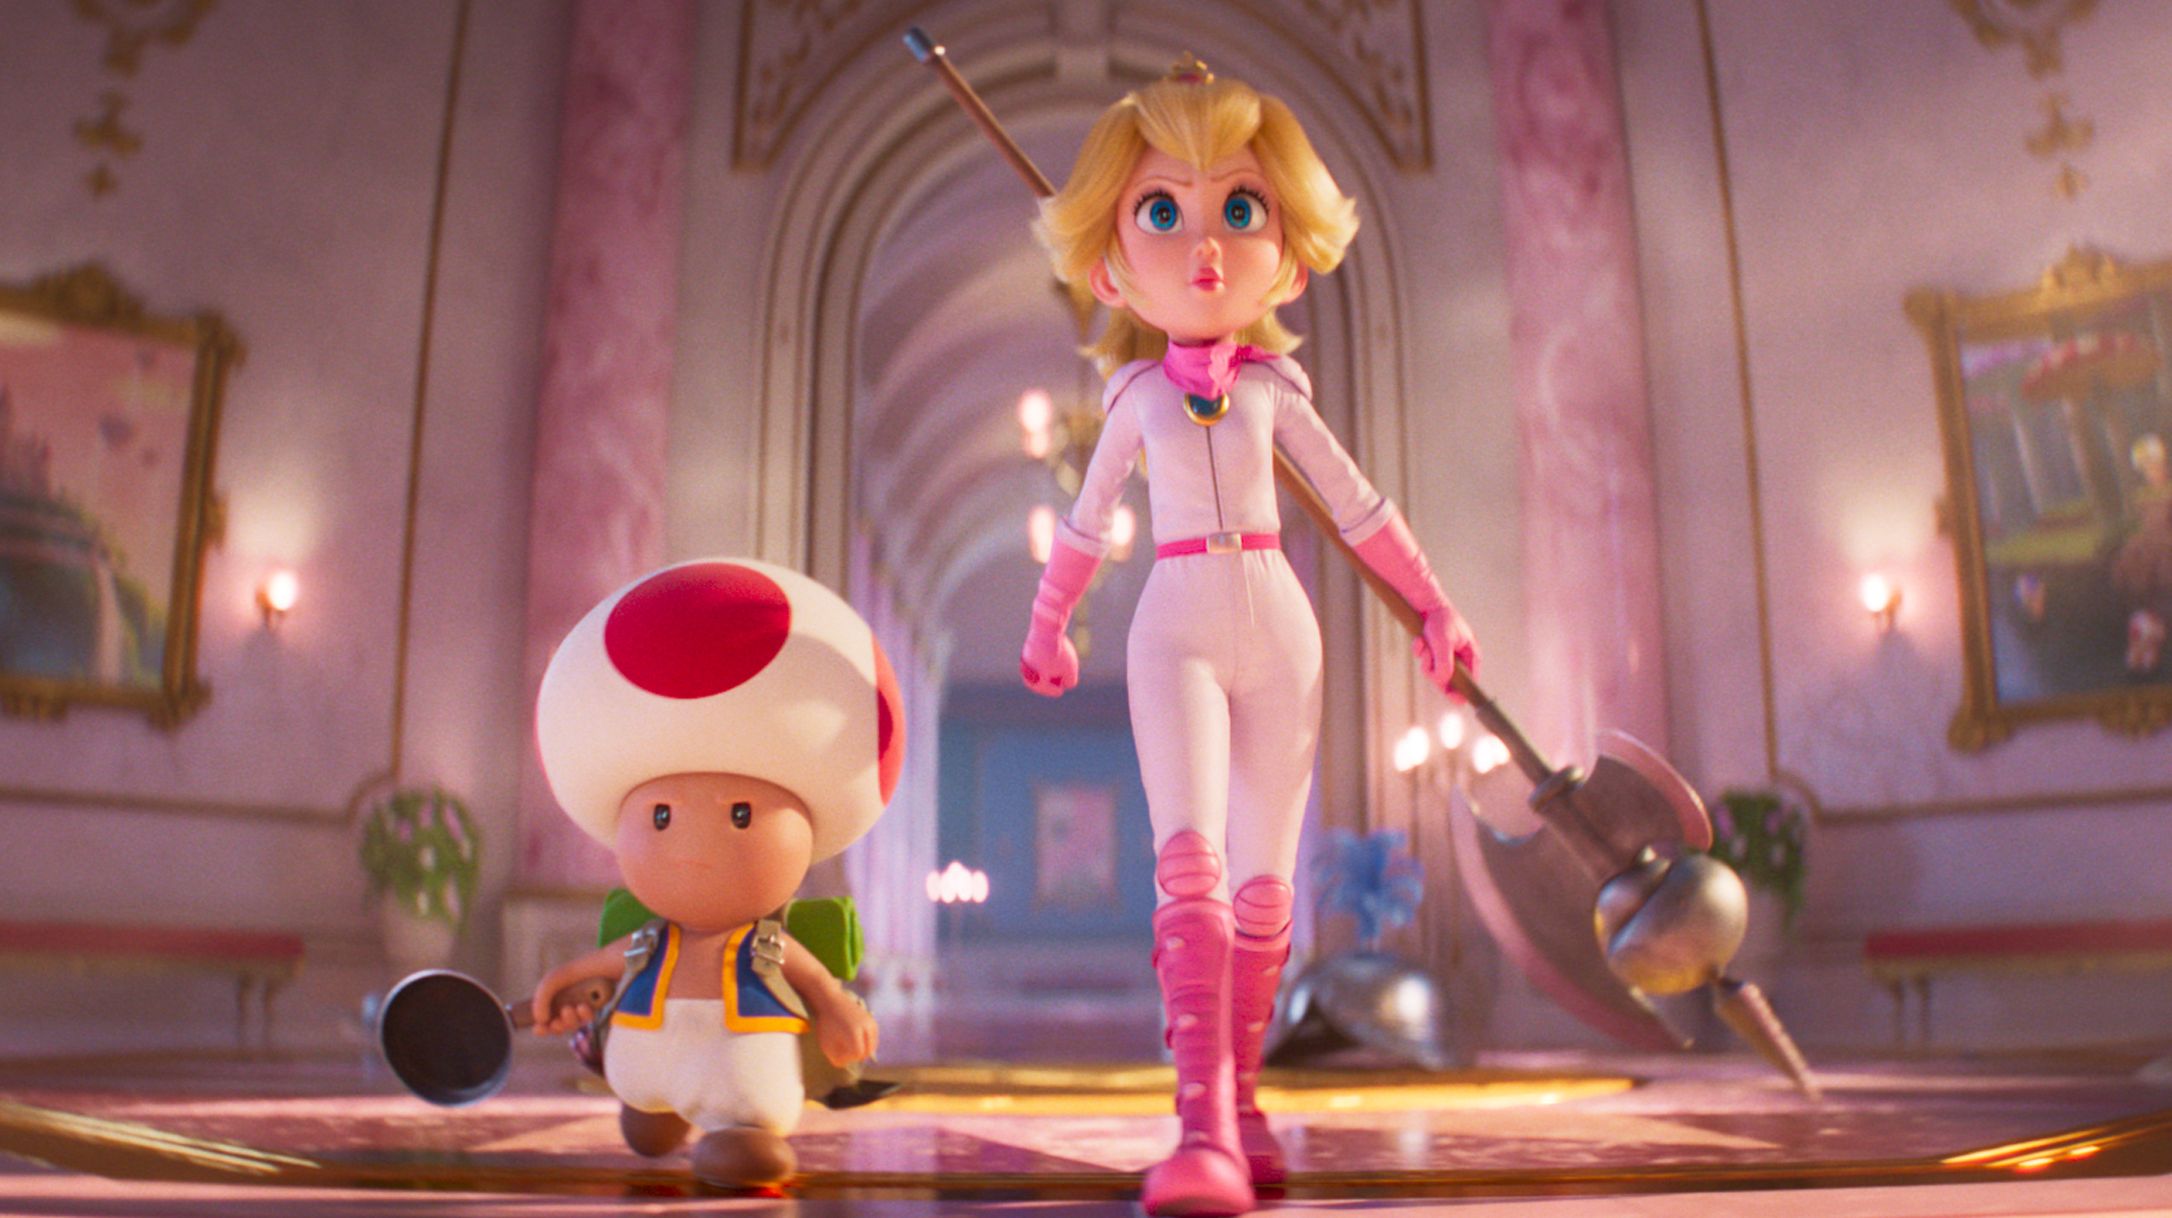 Peaches' Song From 'Super Mario Bros. Movie' Is Eligible for Oscars